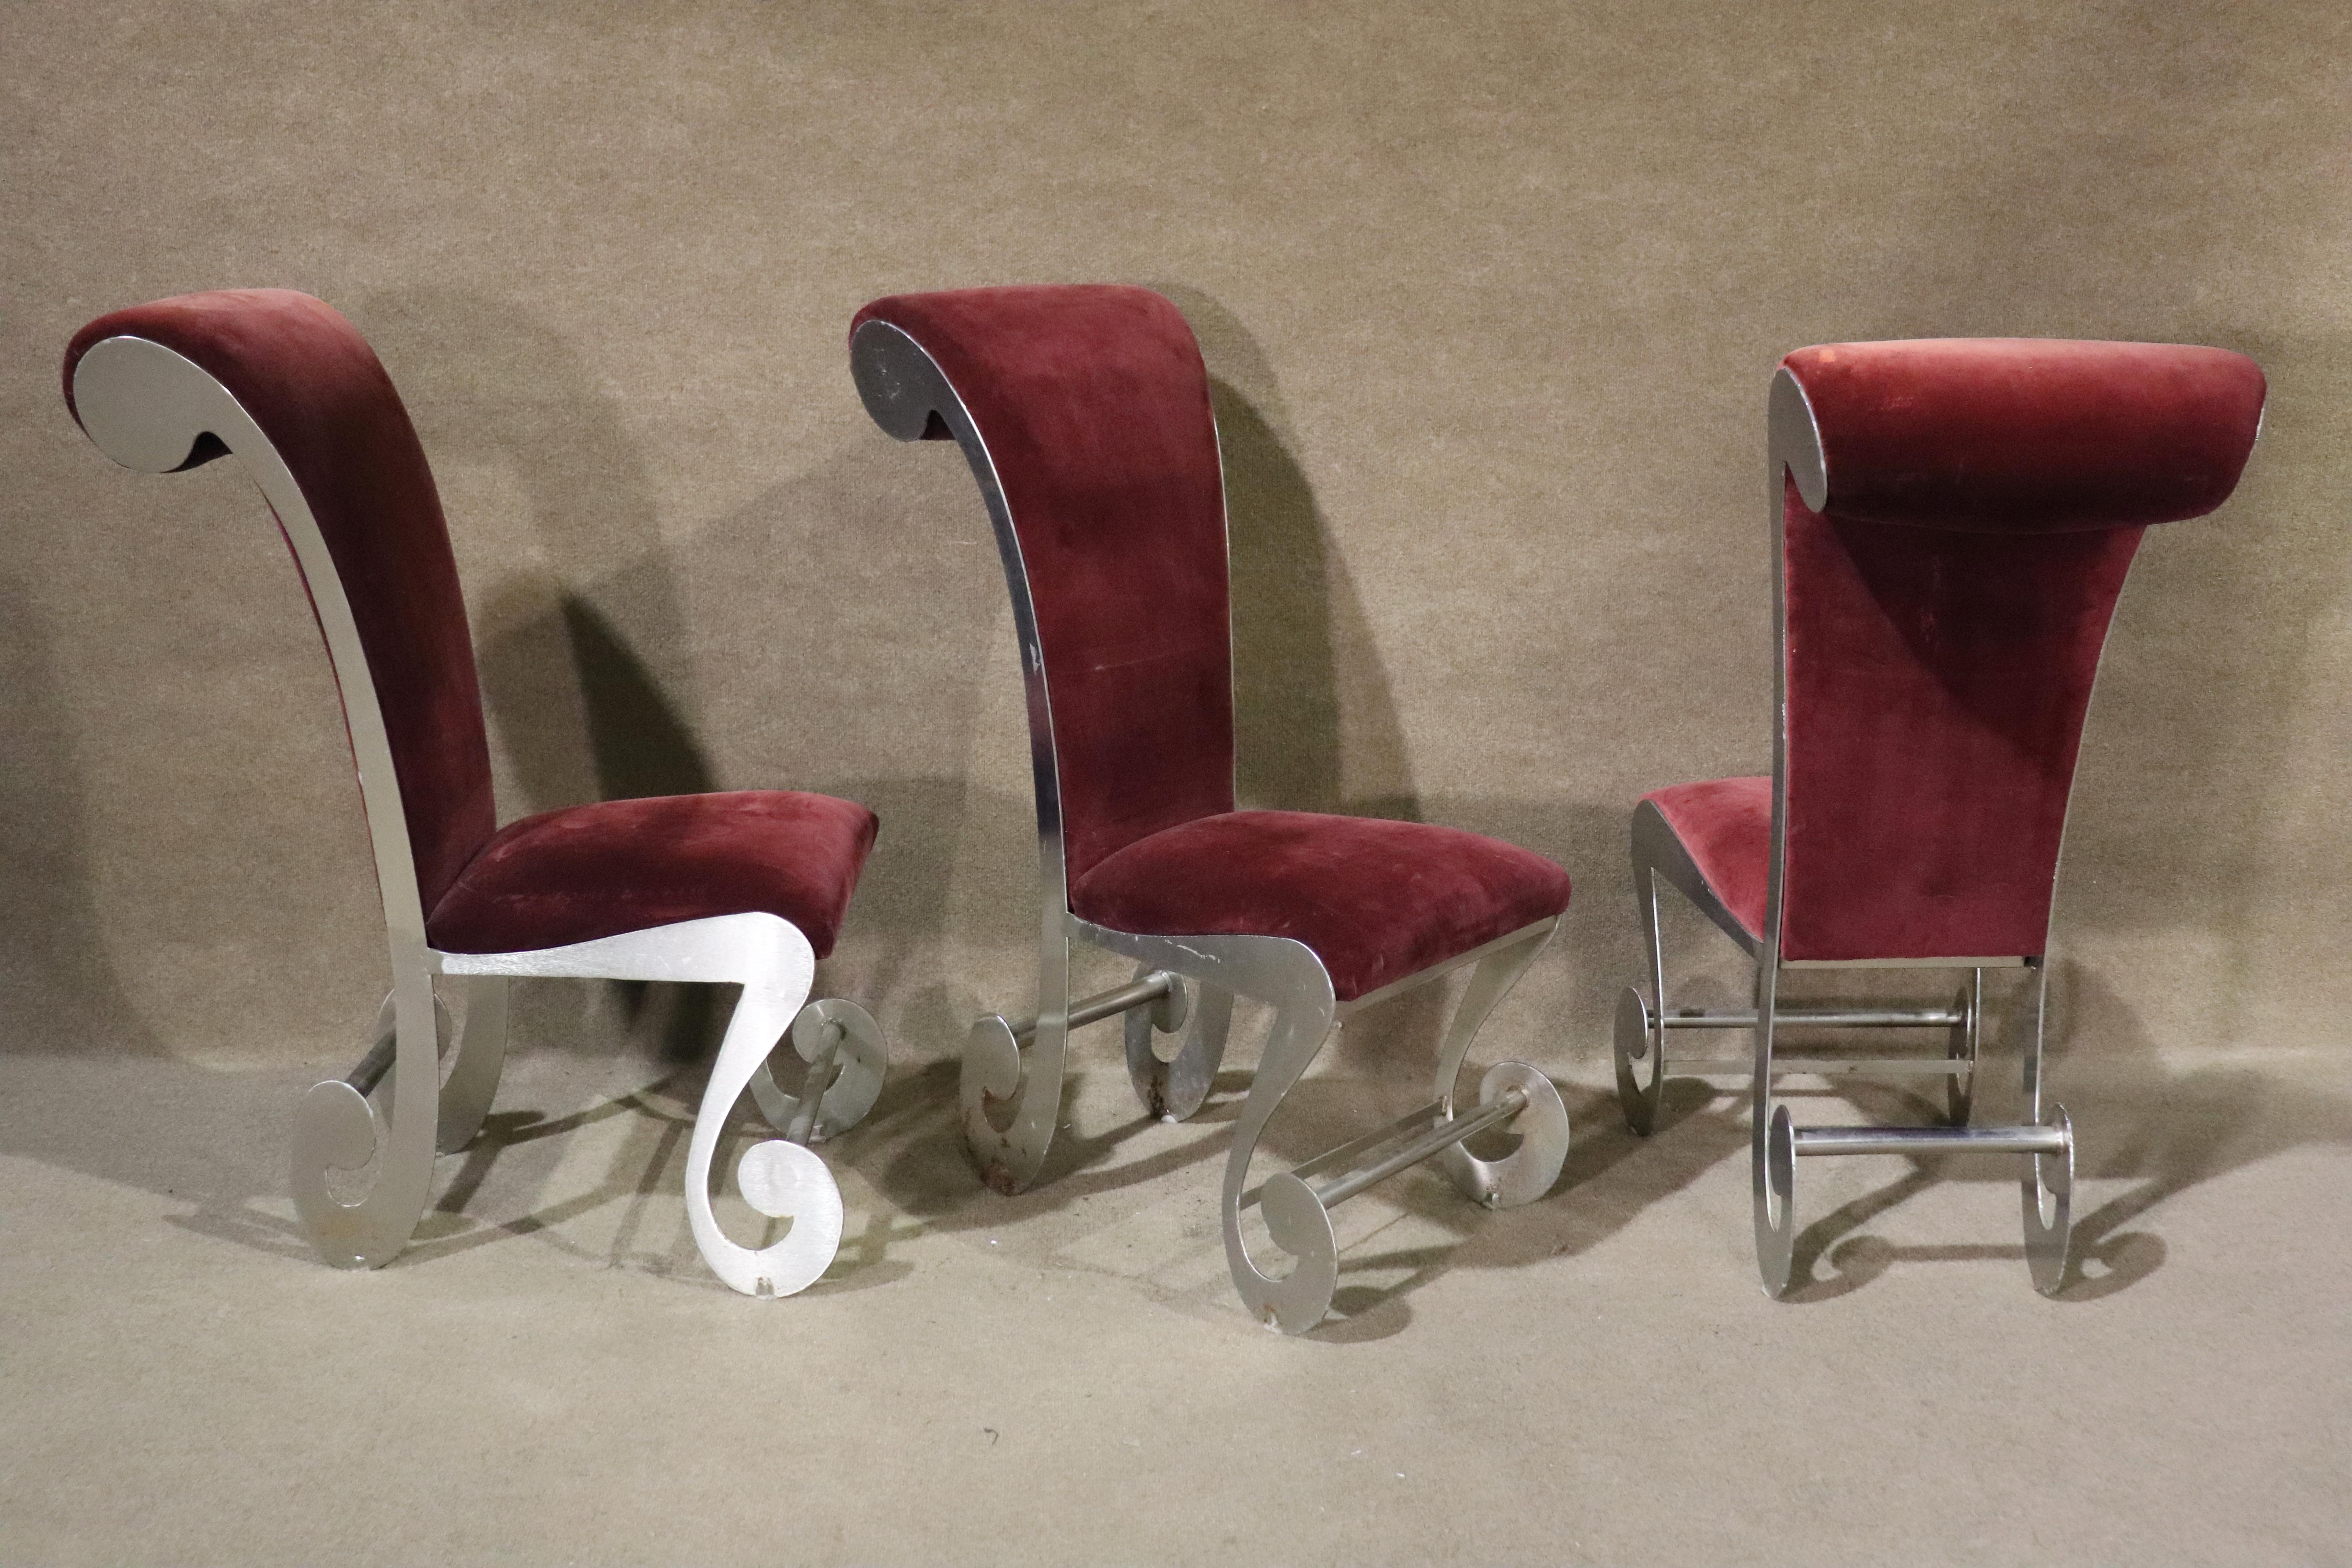 Wild set of six dining chairs with brushed metal frames and velvet seats. Two arm chairs and four side chairs. Fun mad hatter style for your dining room!
Please confirm location NY or NJ